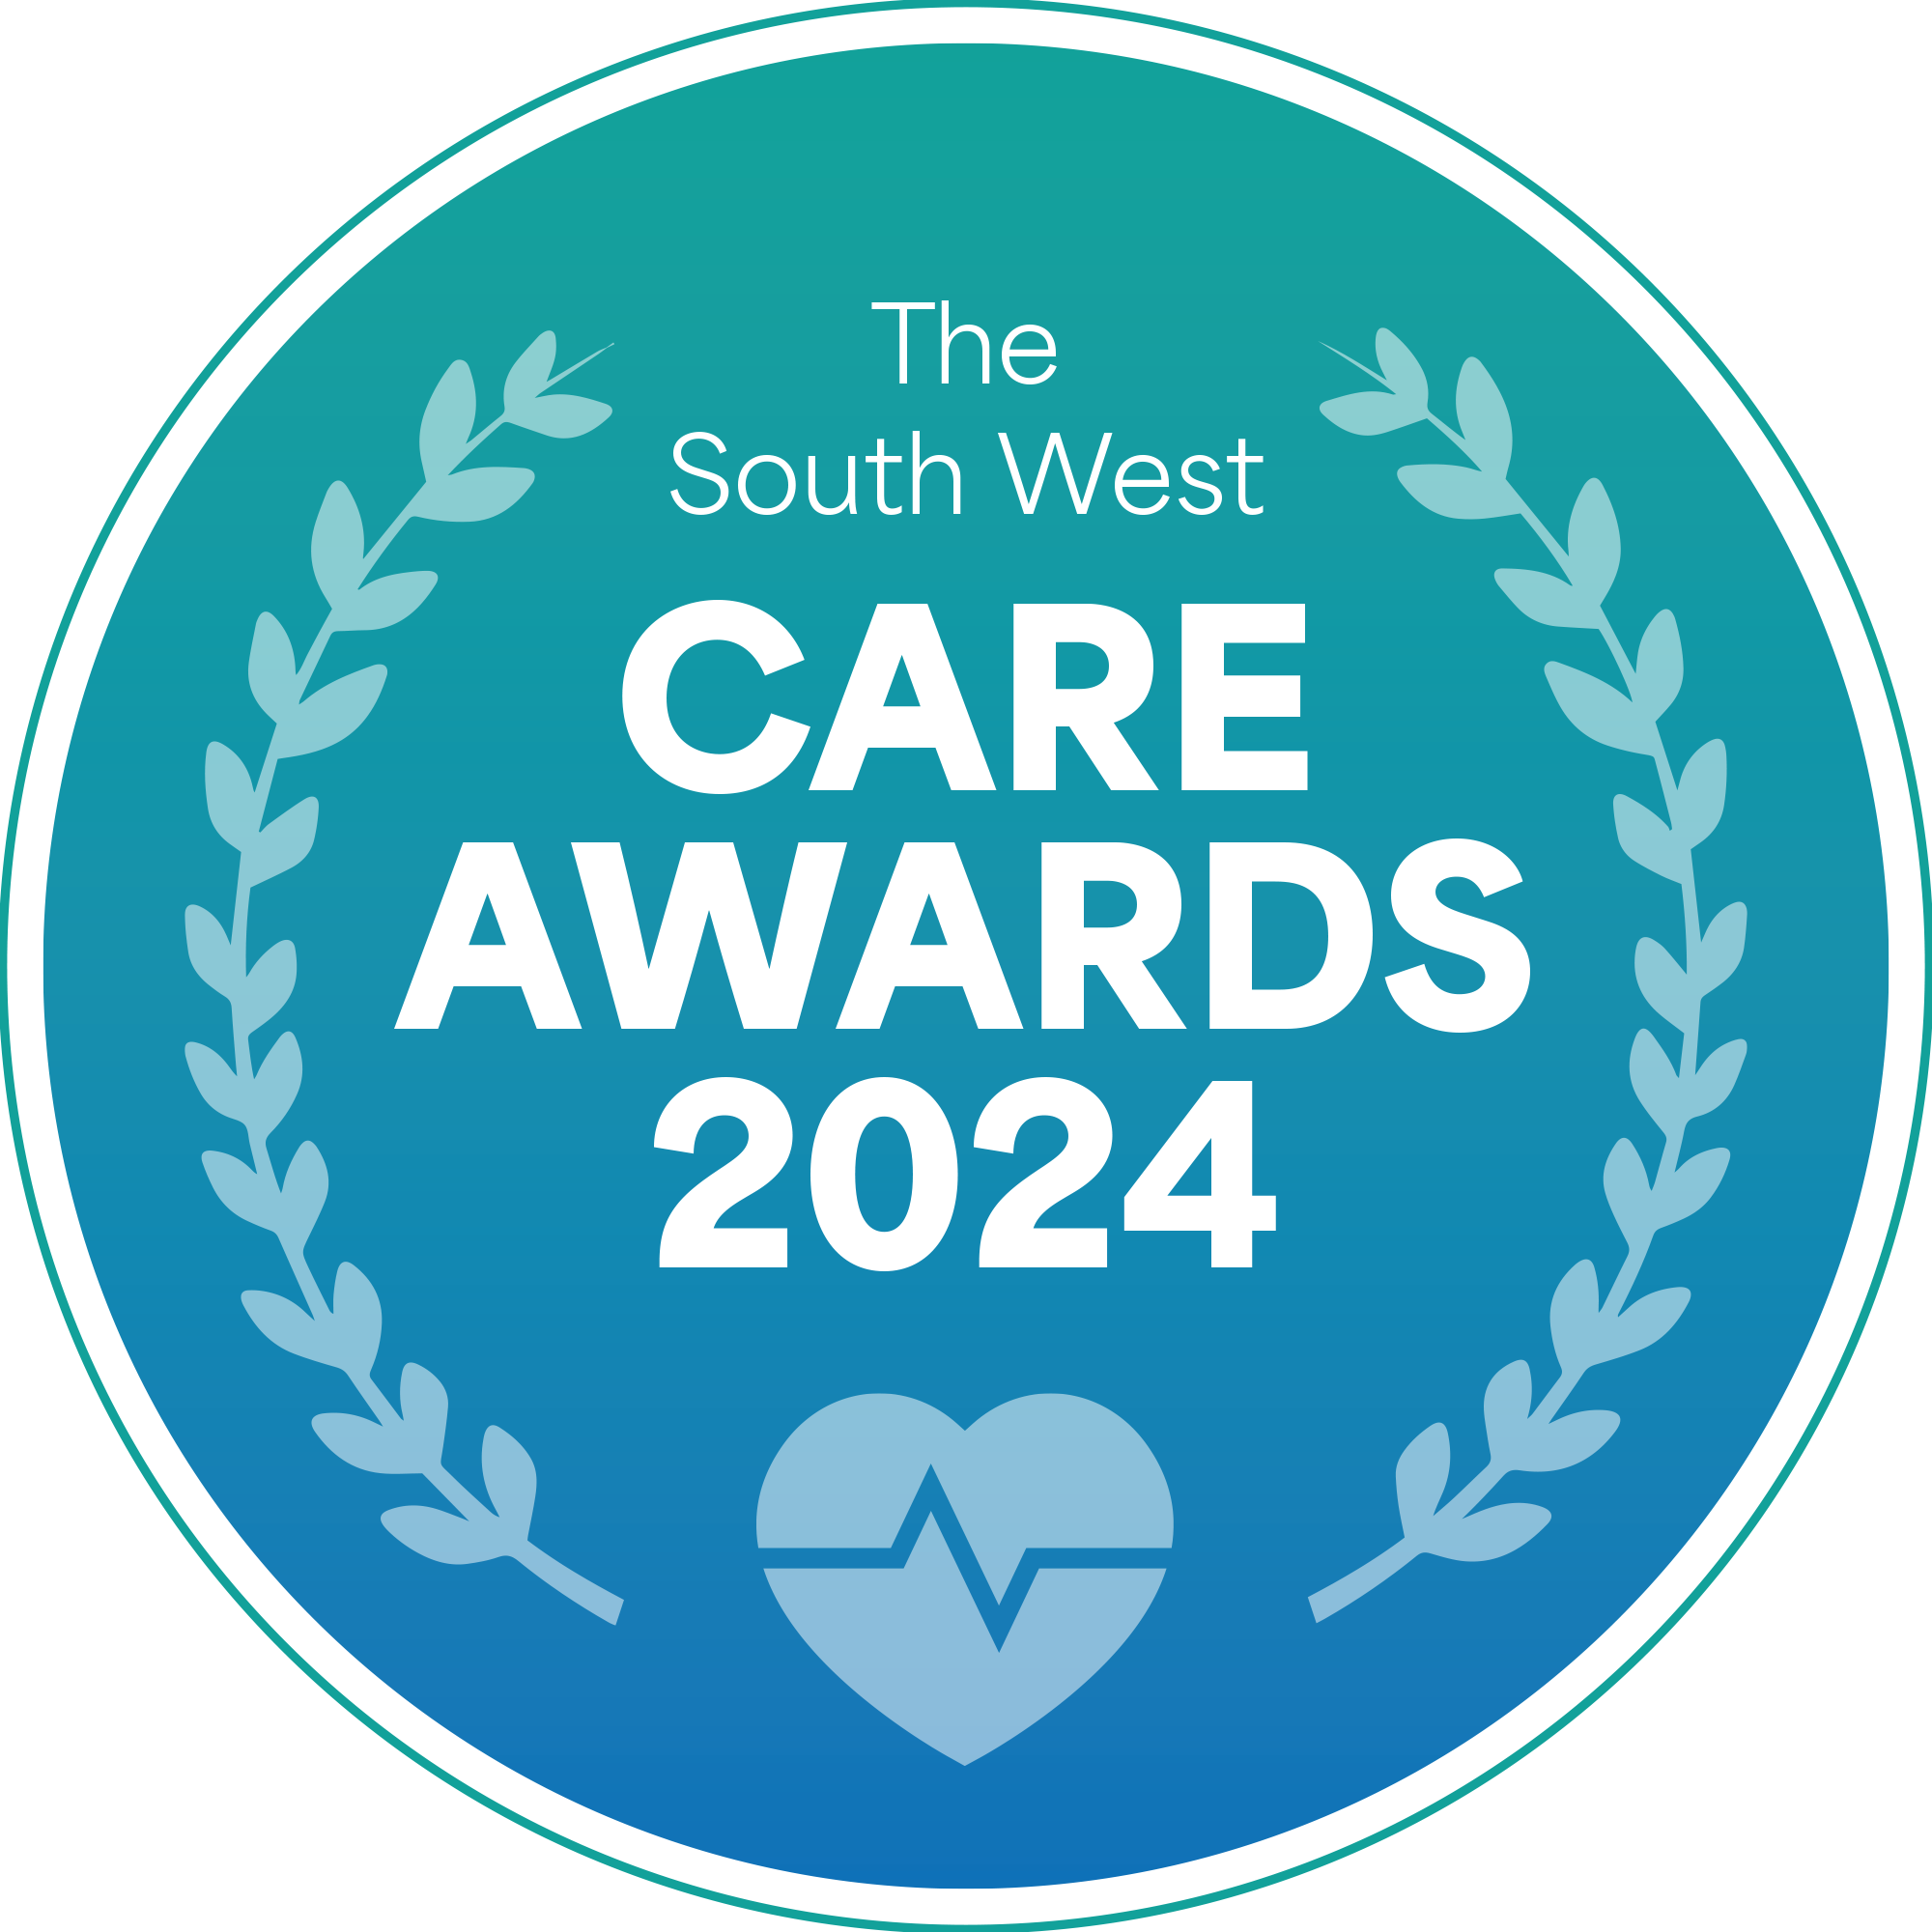 SOUTH WEST CARE AWARDS - Care & Occupational Therapy Show 2023